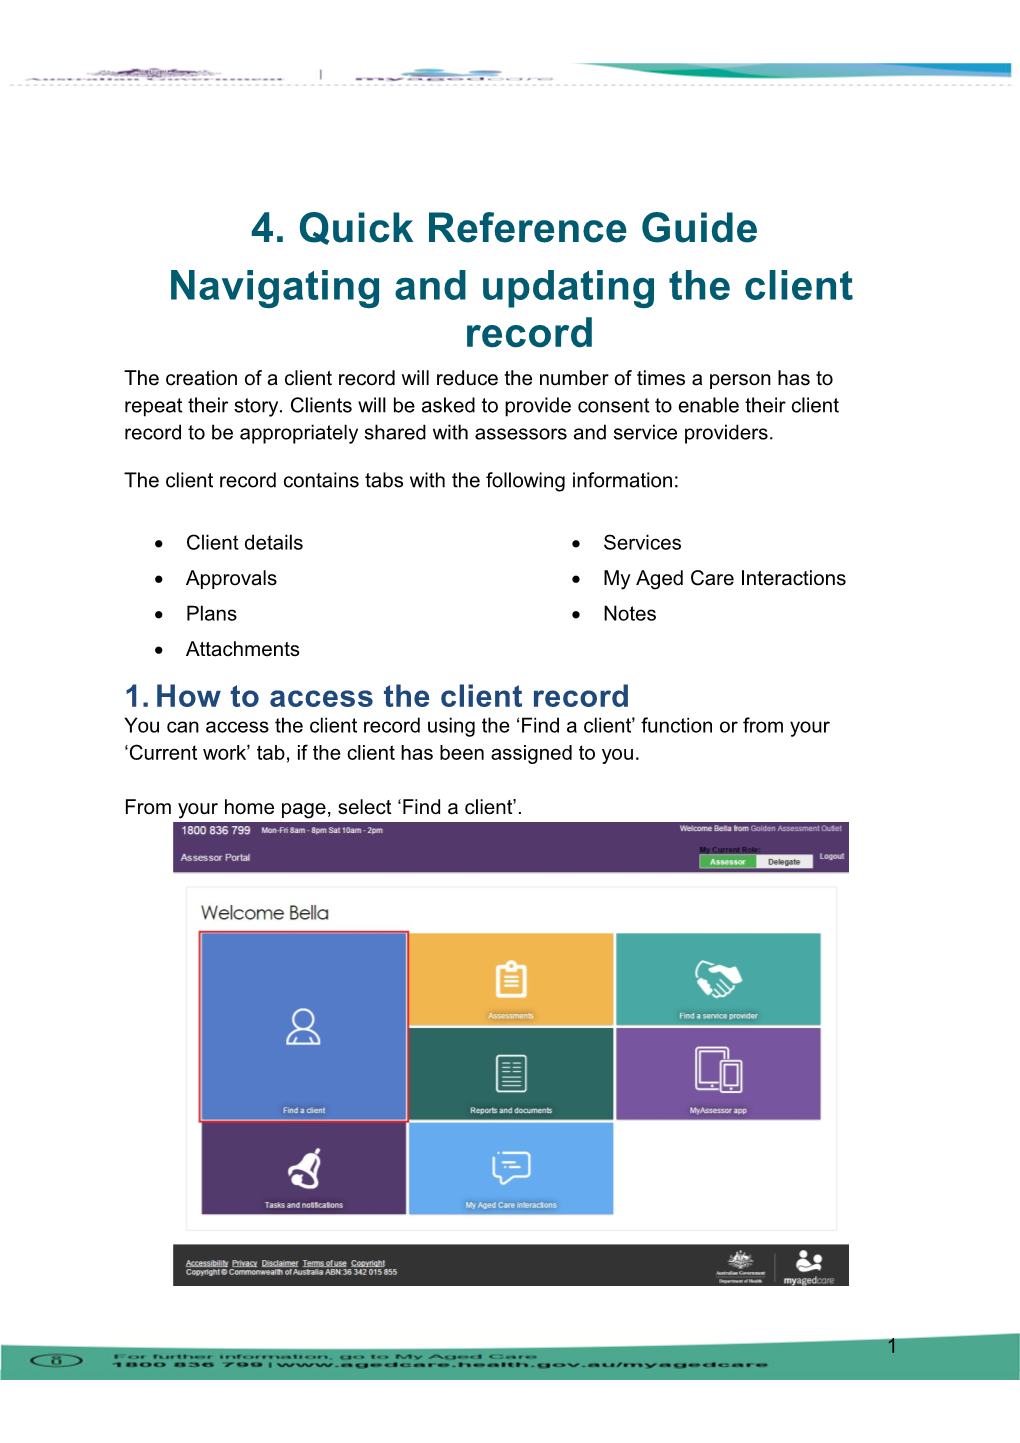 Navigating and Updating the Client Record